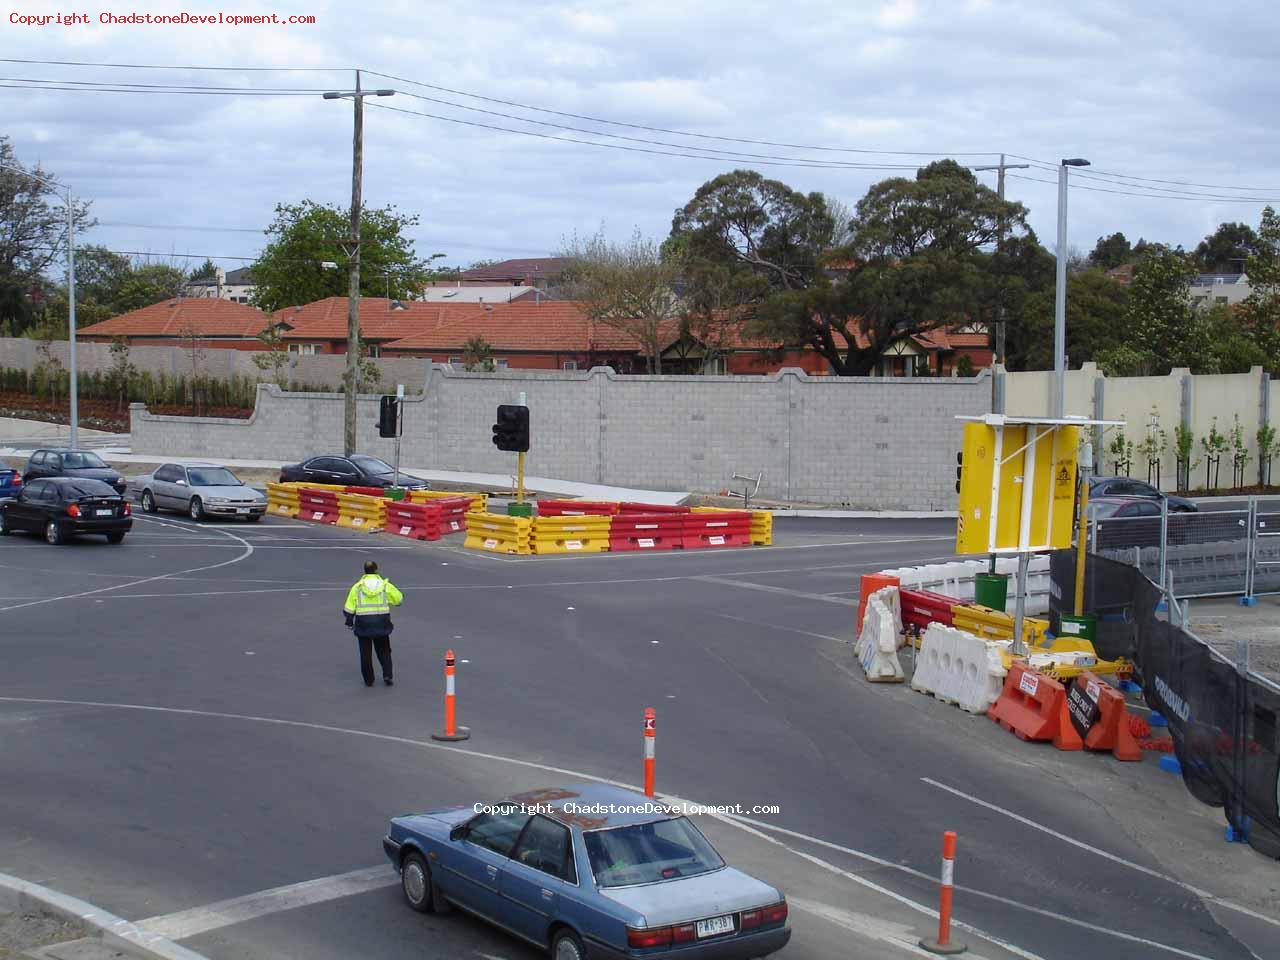 Traffic controller at intersection, allowing only buses to enter - Chadstone Development Discussions